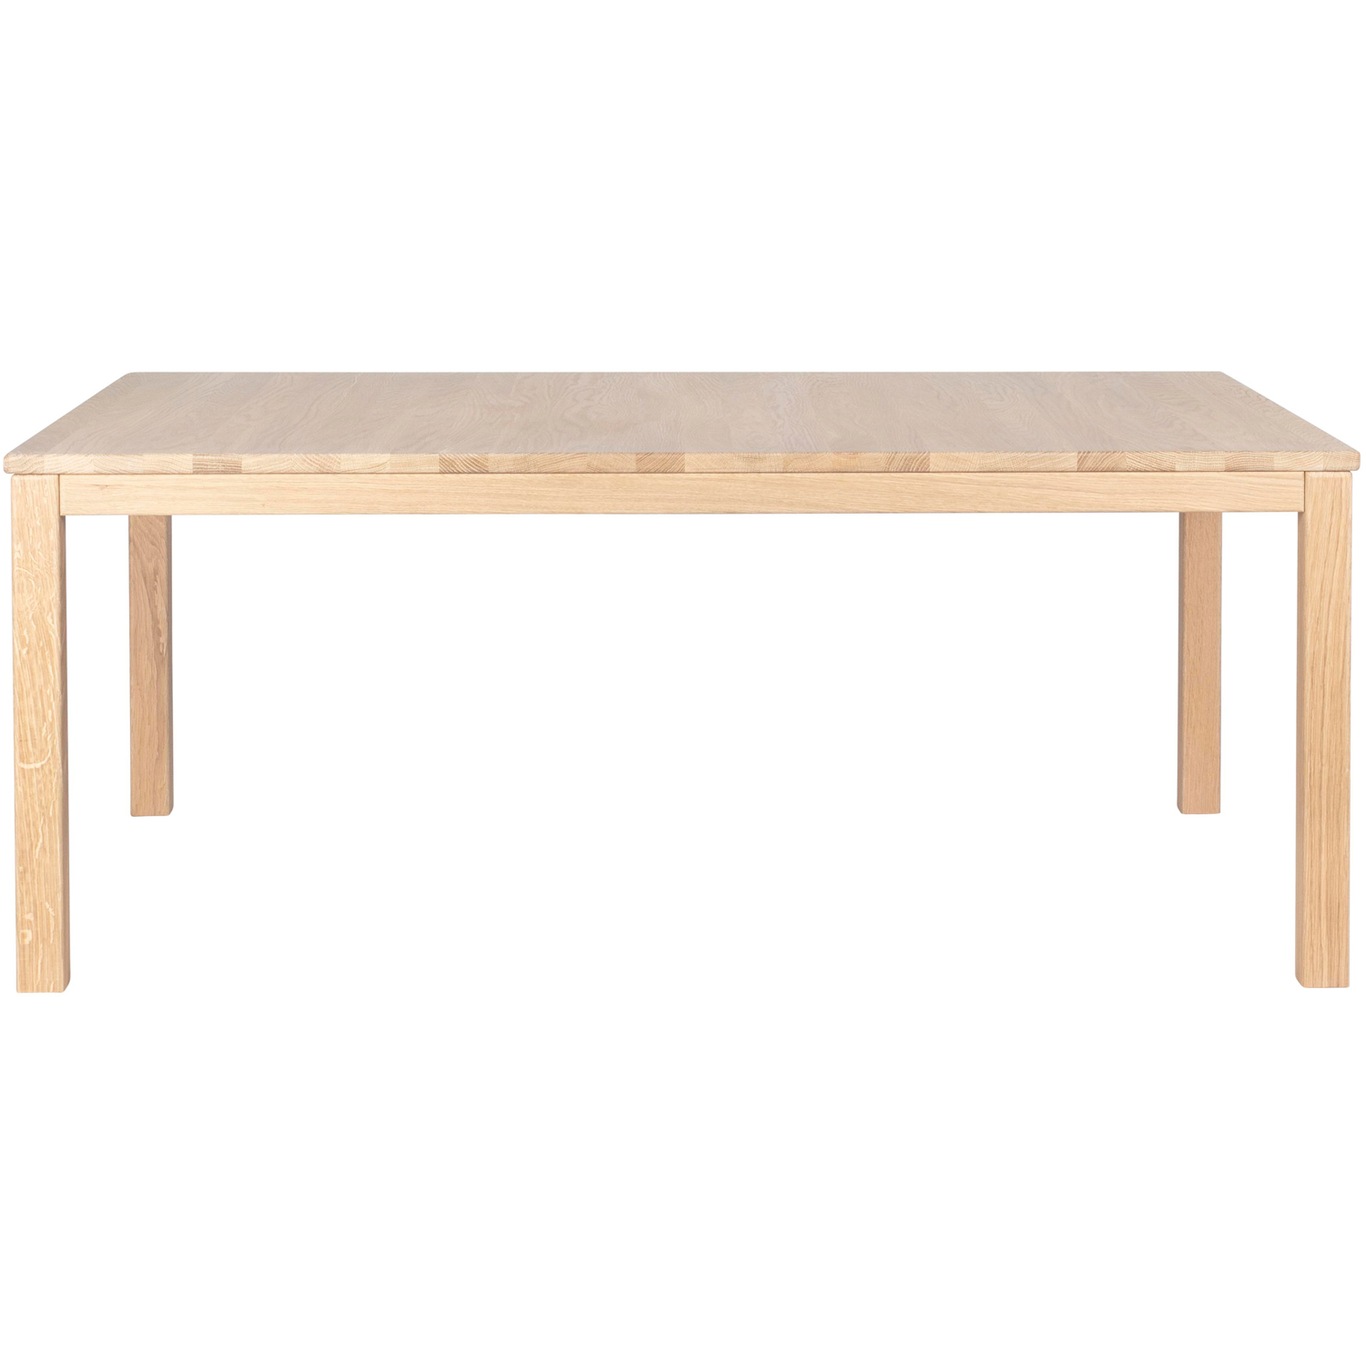 Klassik 6B Coffee Table With Drawer, 85x130 cm, White Oiled Oak